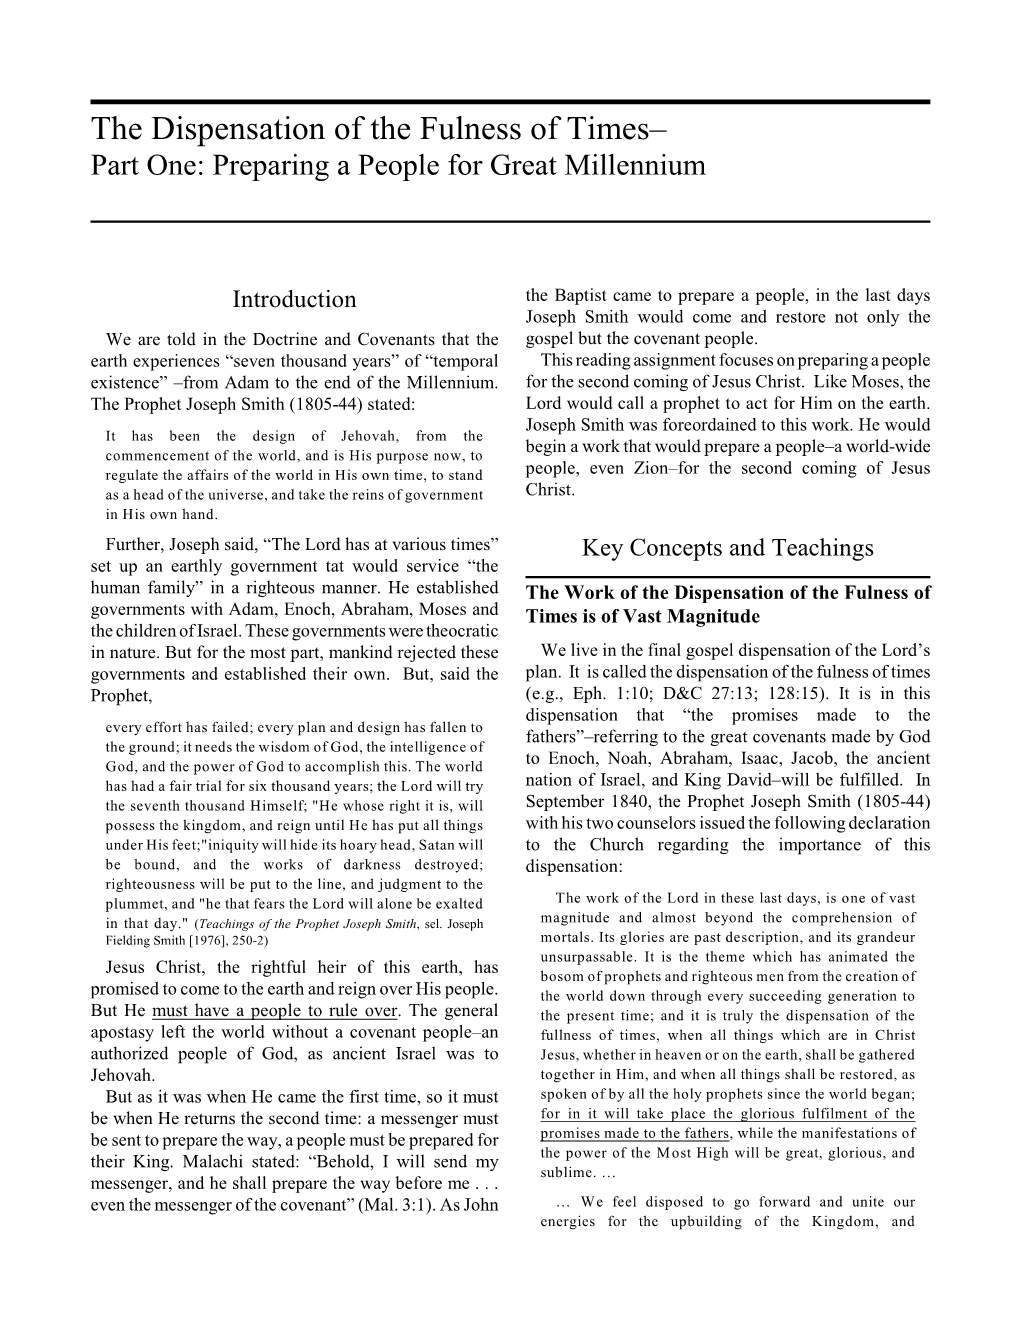 The Dispensation of the Fulness of Times– Part One: Preparing a People for Great Millennium